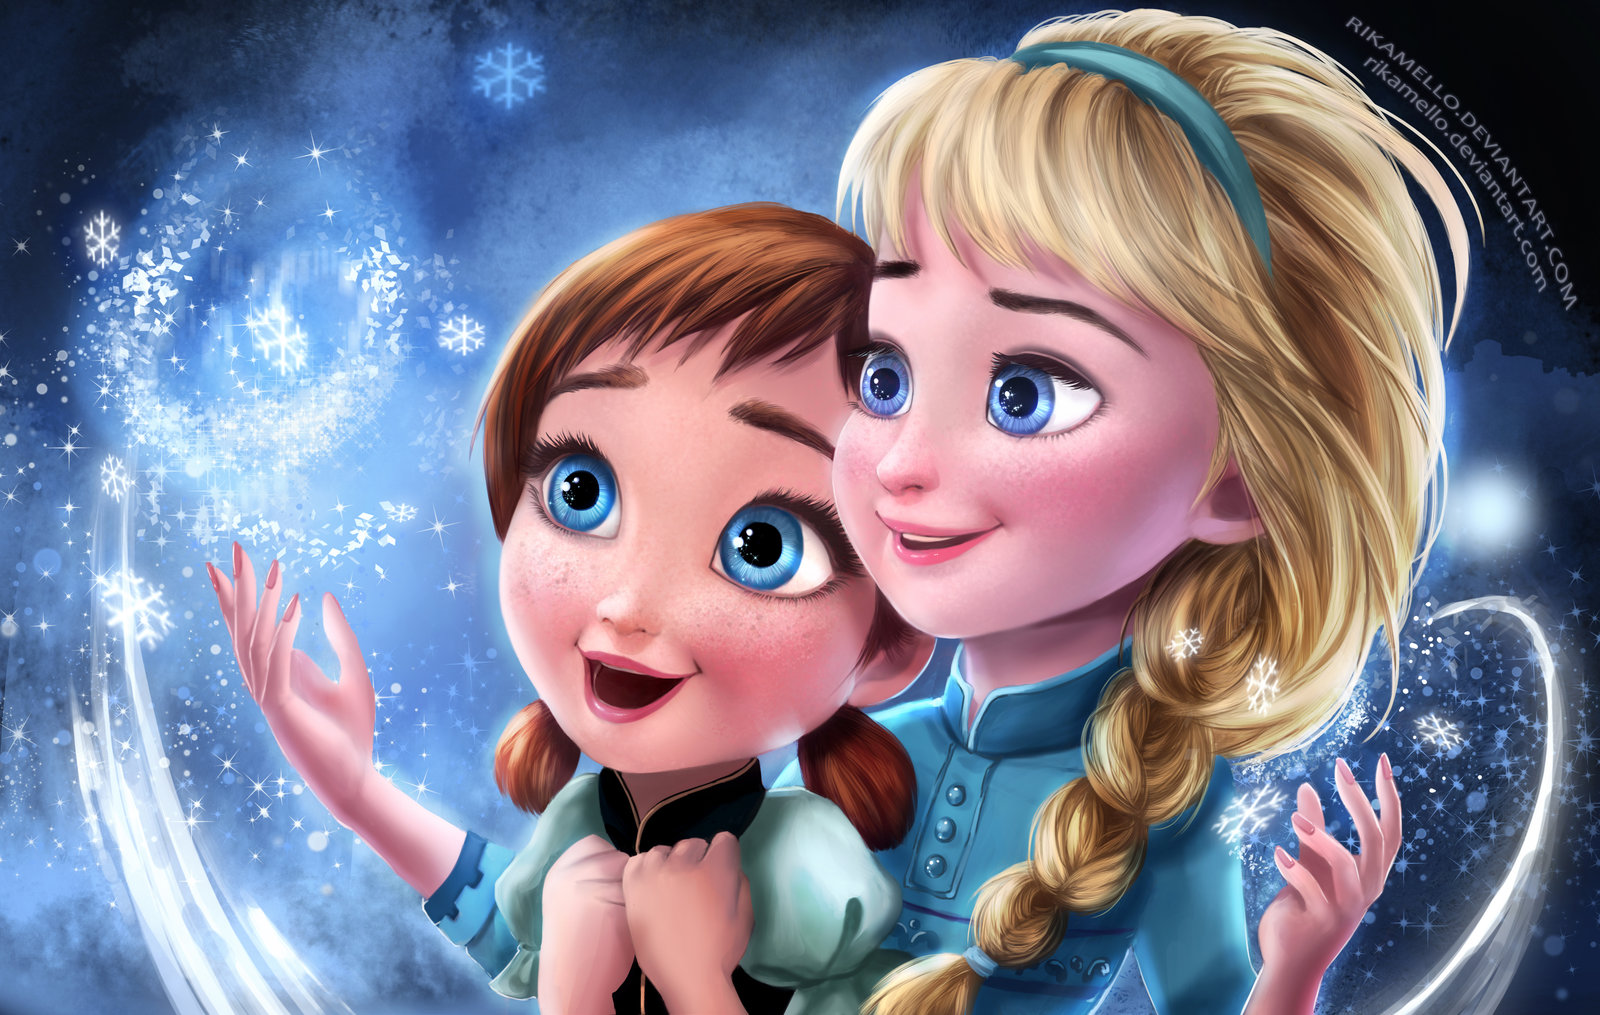 Frozen Disney Wallpaper Elsa And Anna Frozenelsa and anna by